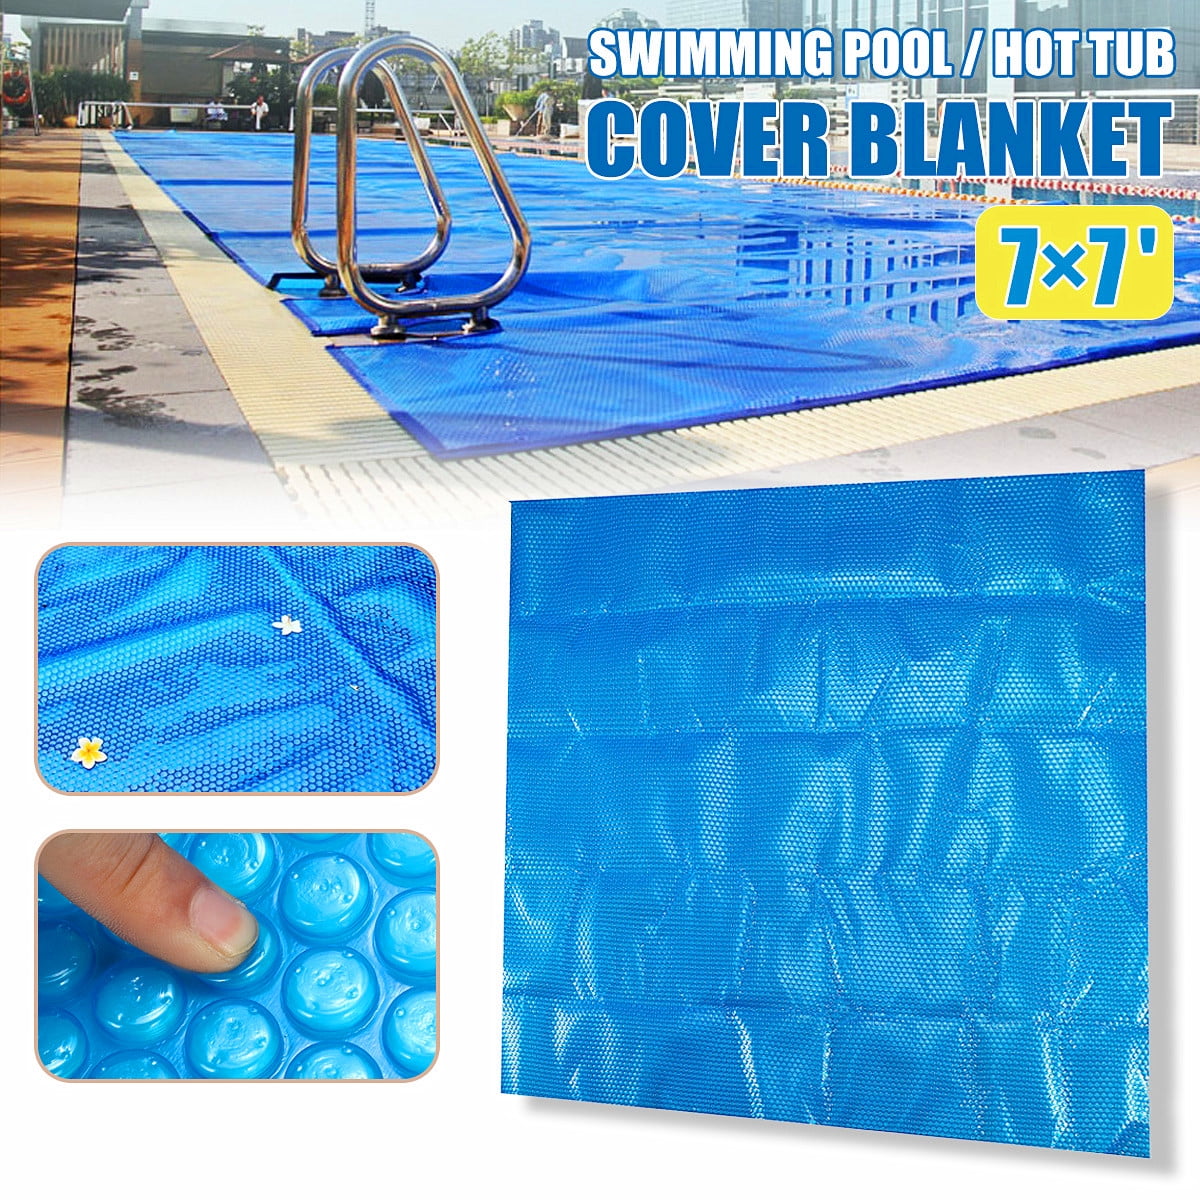 7/'x7 Ft Square Spa /& Hot Tub Thermal Solar Blanket Cover Heat Retention 15 Mil